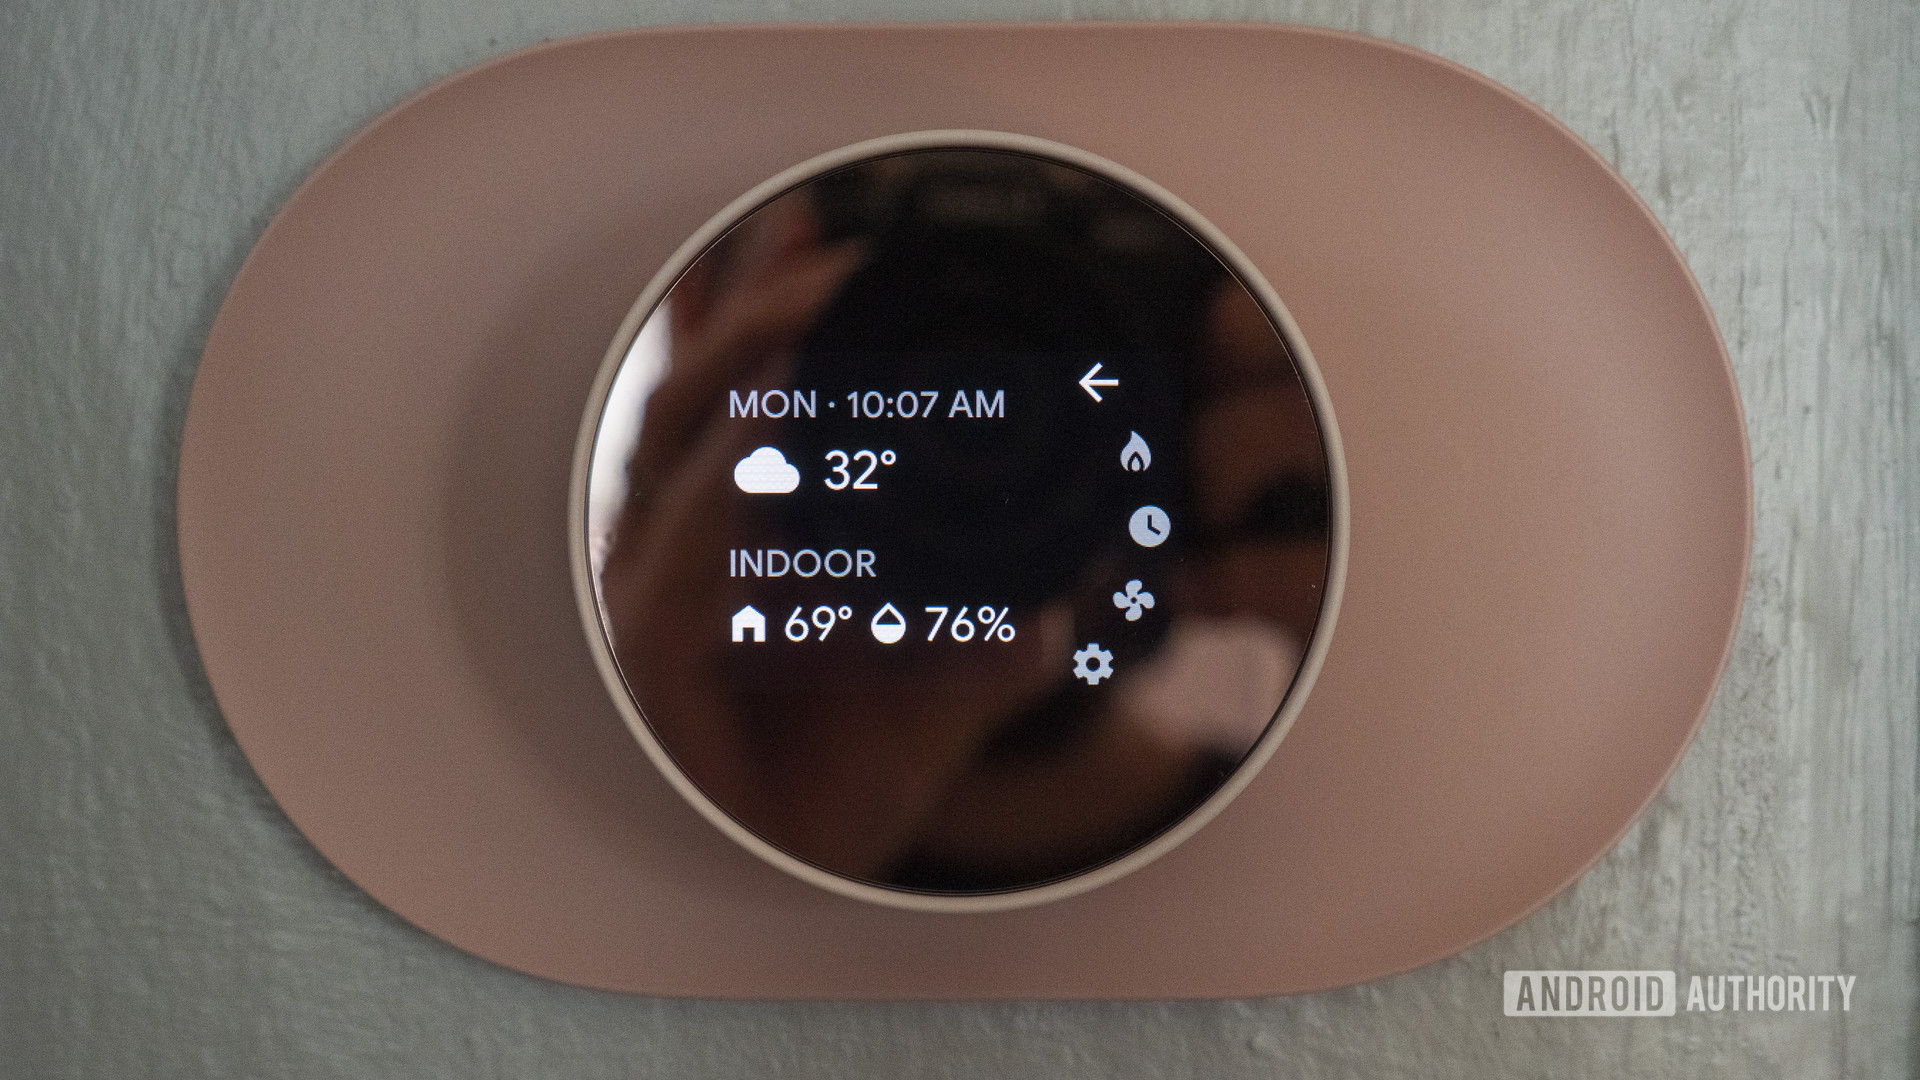 How to reset or restart your Google Nest Thermostat Android Authority